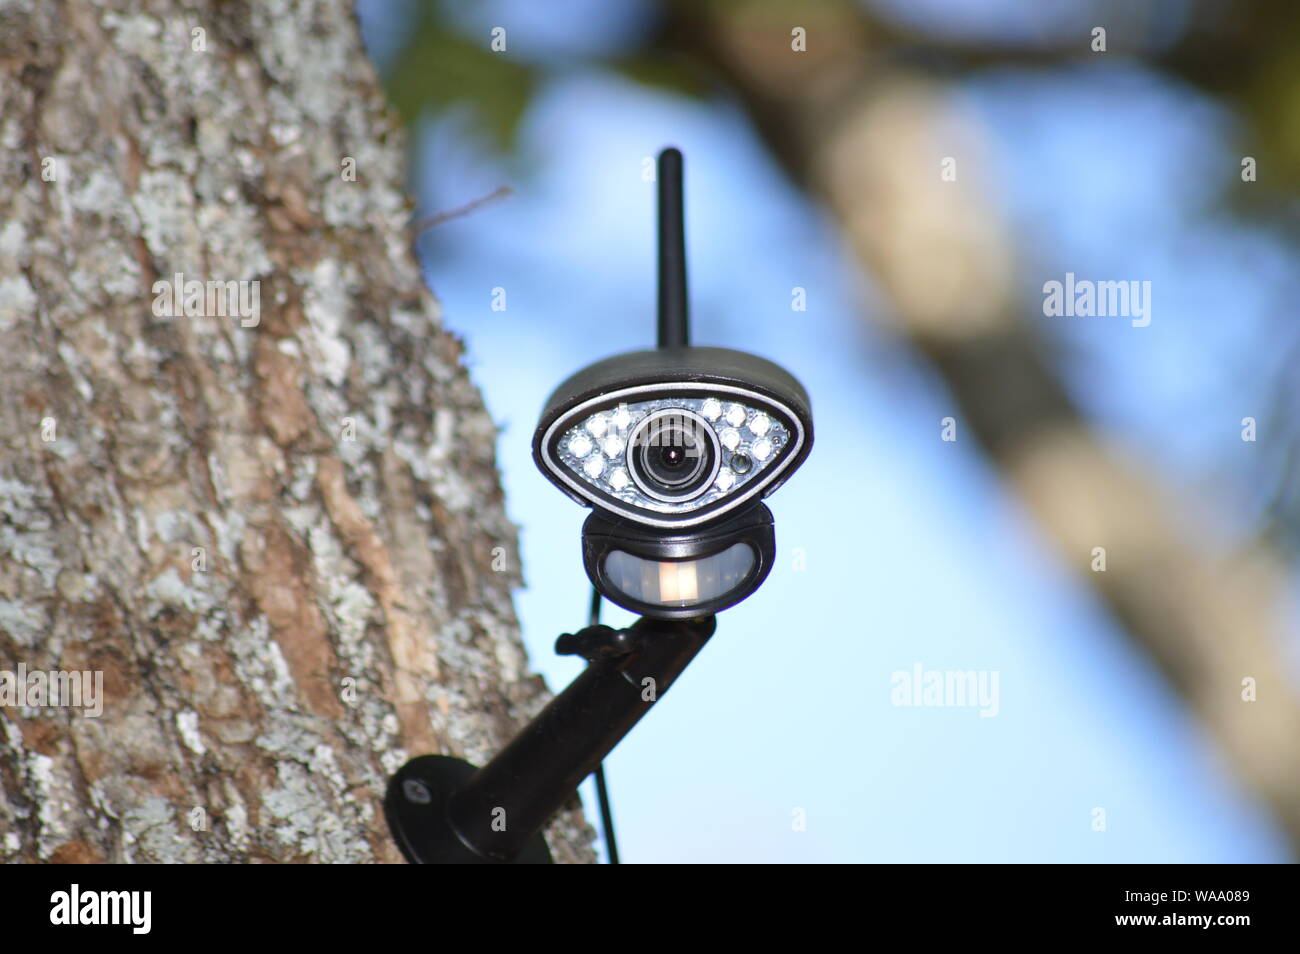 Closeup on a video surveillance camera in the forest Stock Photo